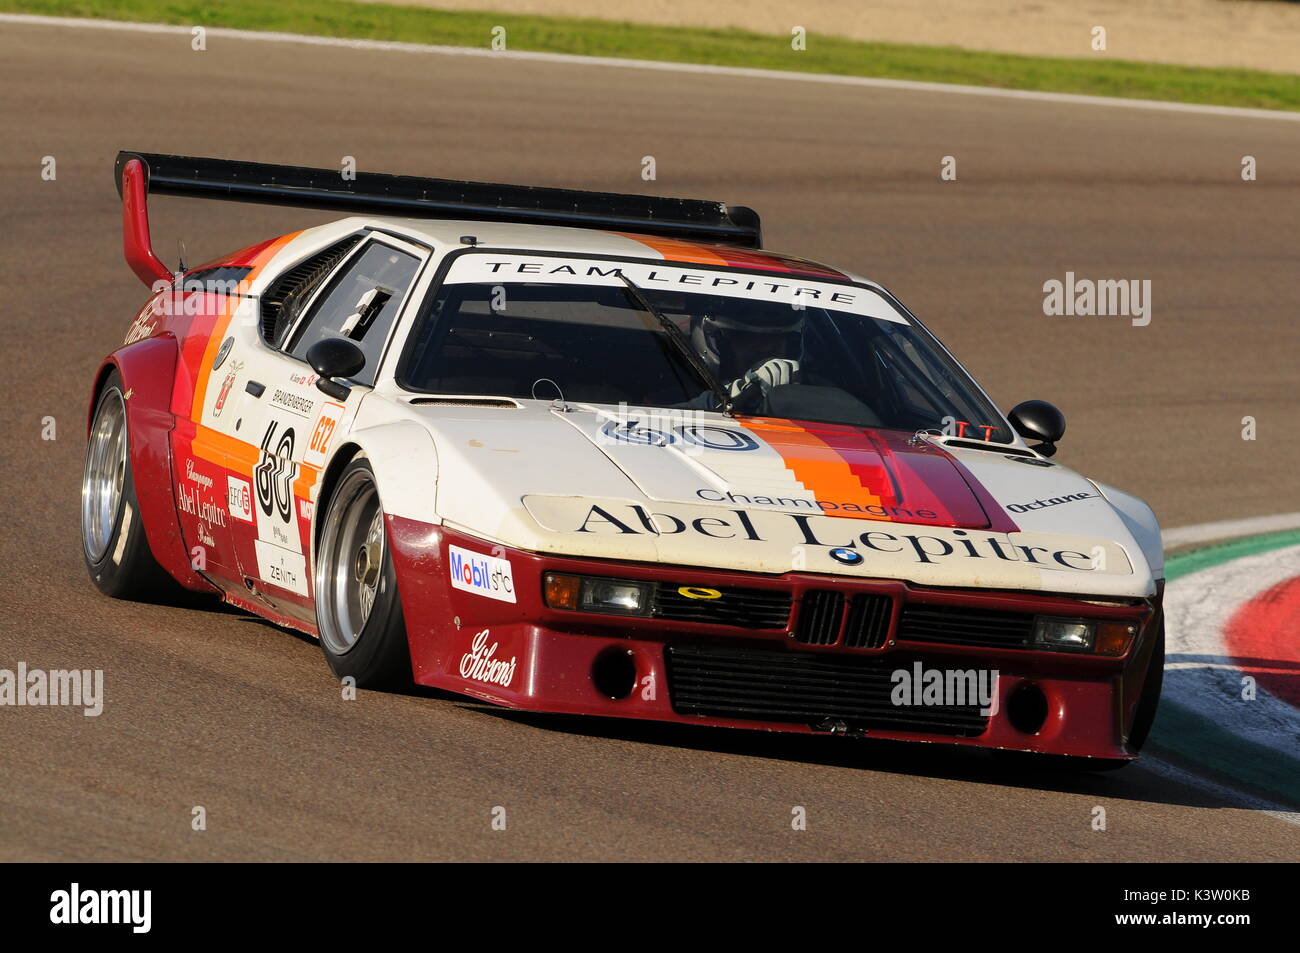 Imola Classic 22 Oct 2016 Bmw M1 1979 Driven By Unknown